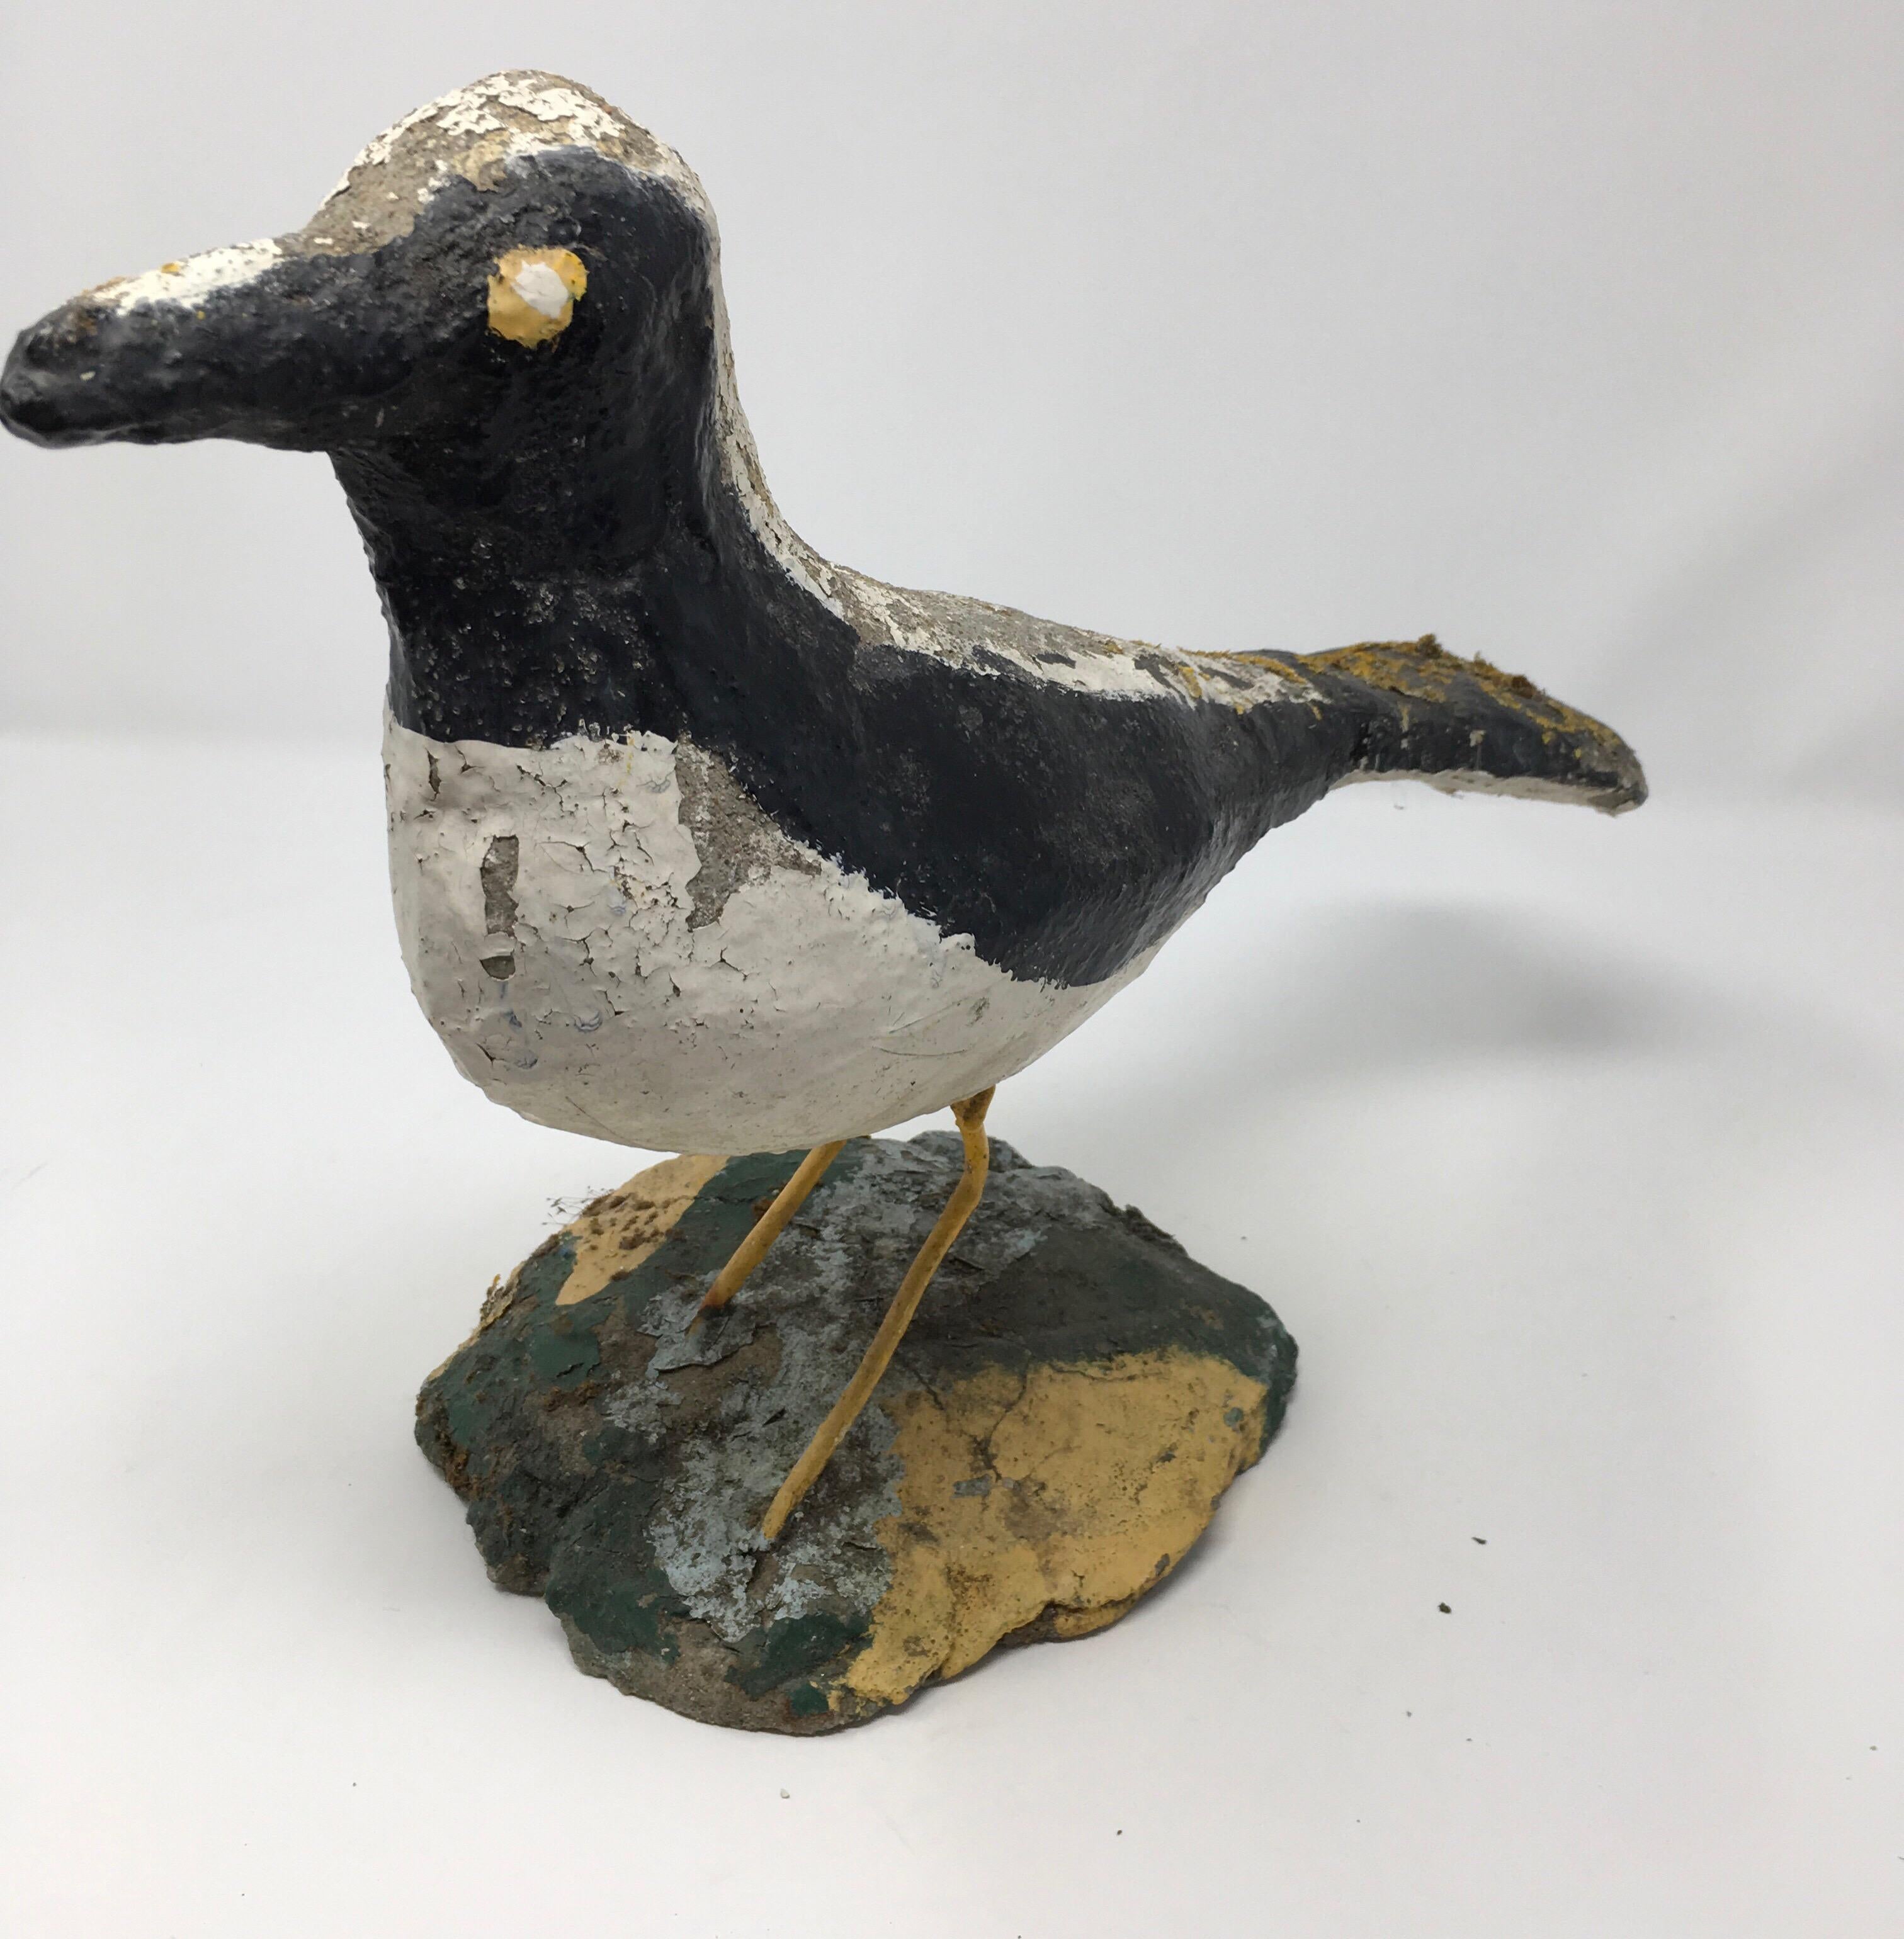 Found in England, this hand made concrete bird will add whimsy and joy to any setting. When found we were told 